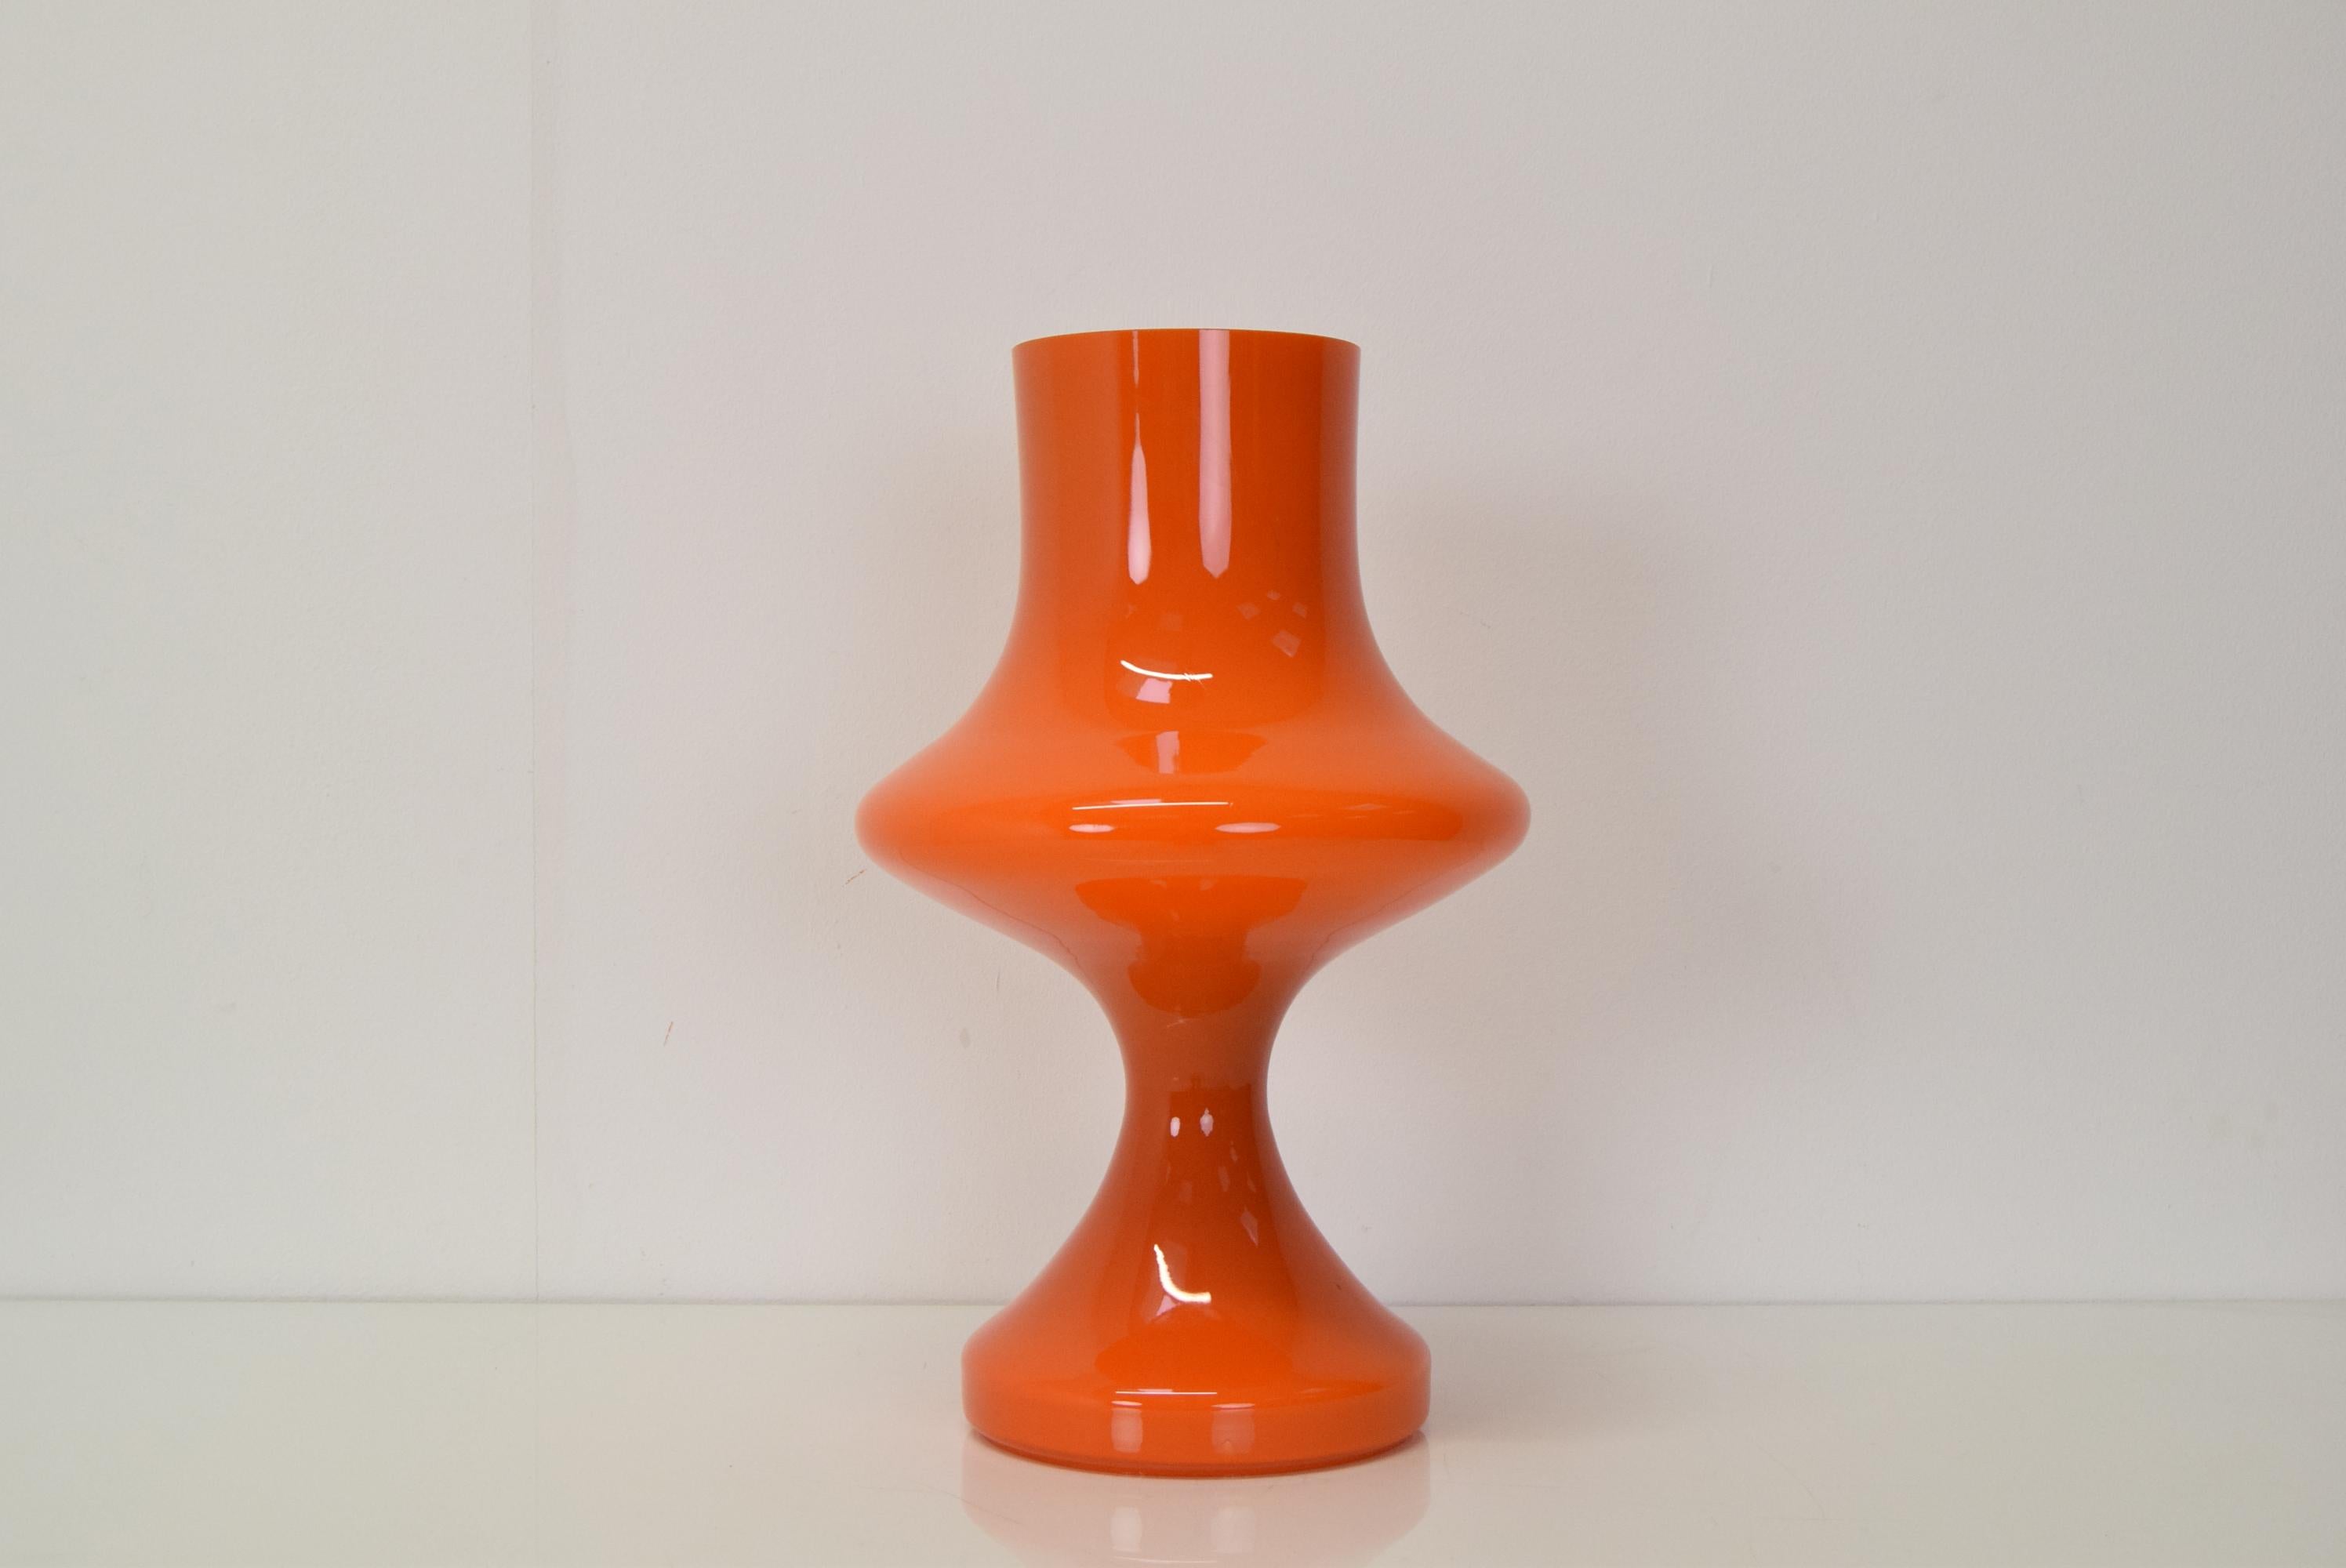 
The lamp is made of three-layer opal glass in deep orange color
The lamp is cleaned
Equipped with new electrical installation
E27 or E26 bulb
US adapter included
Good Condition